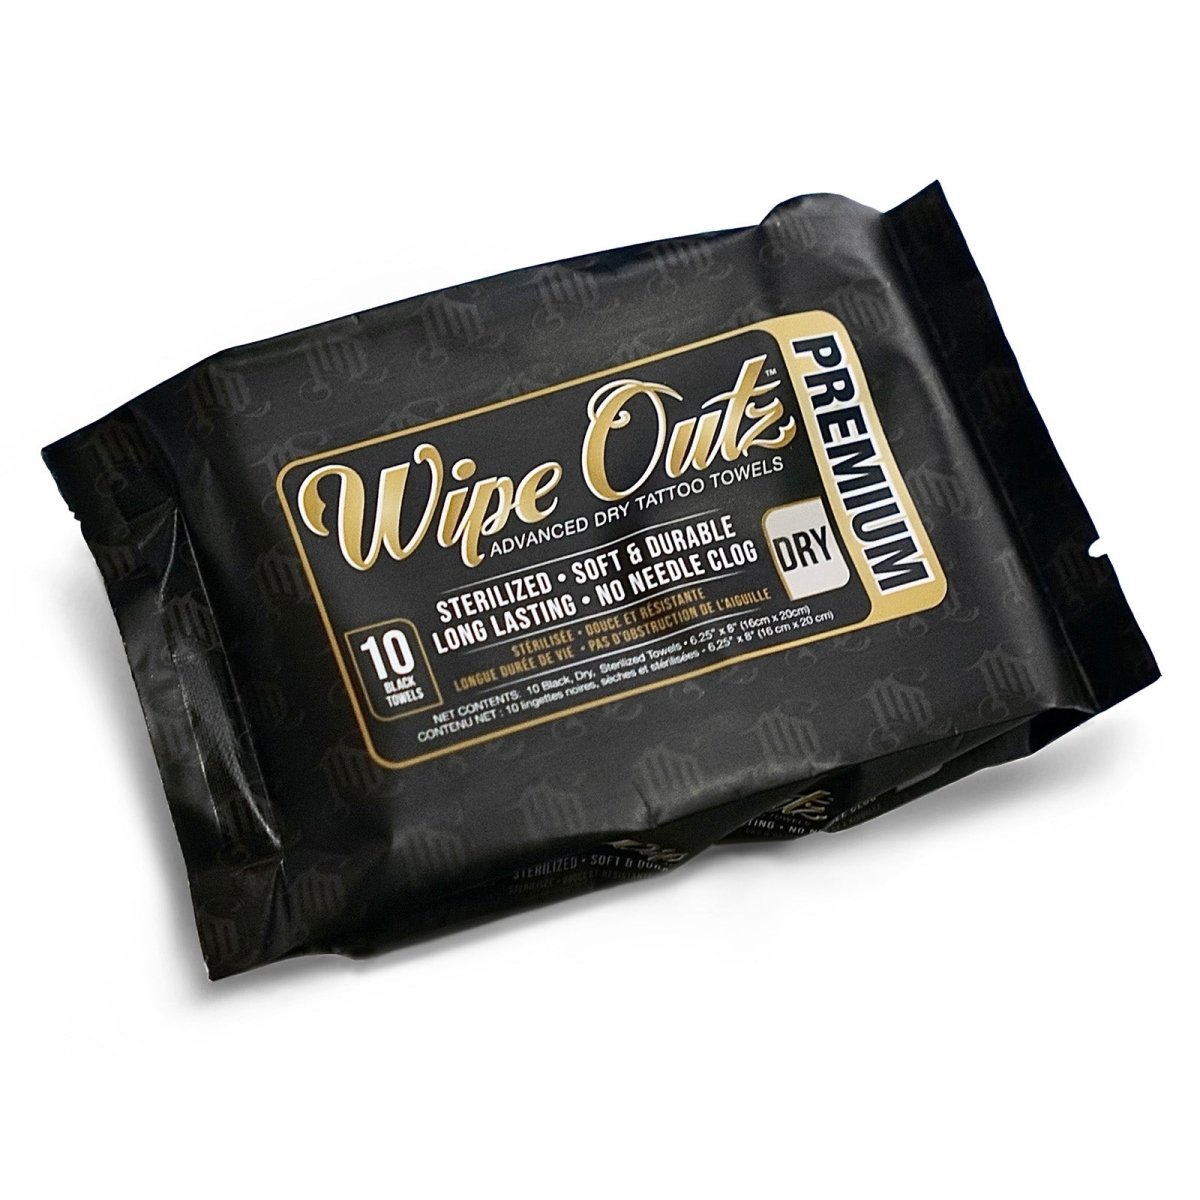 Wipe Outz Premium Dry Tattoo Towels (Black 10 Count) - MD Wipe Outz